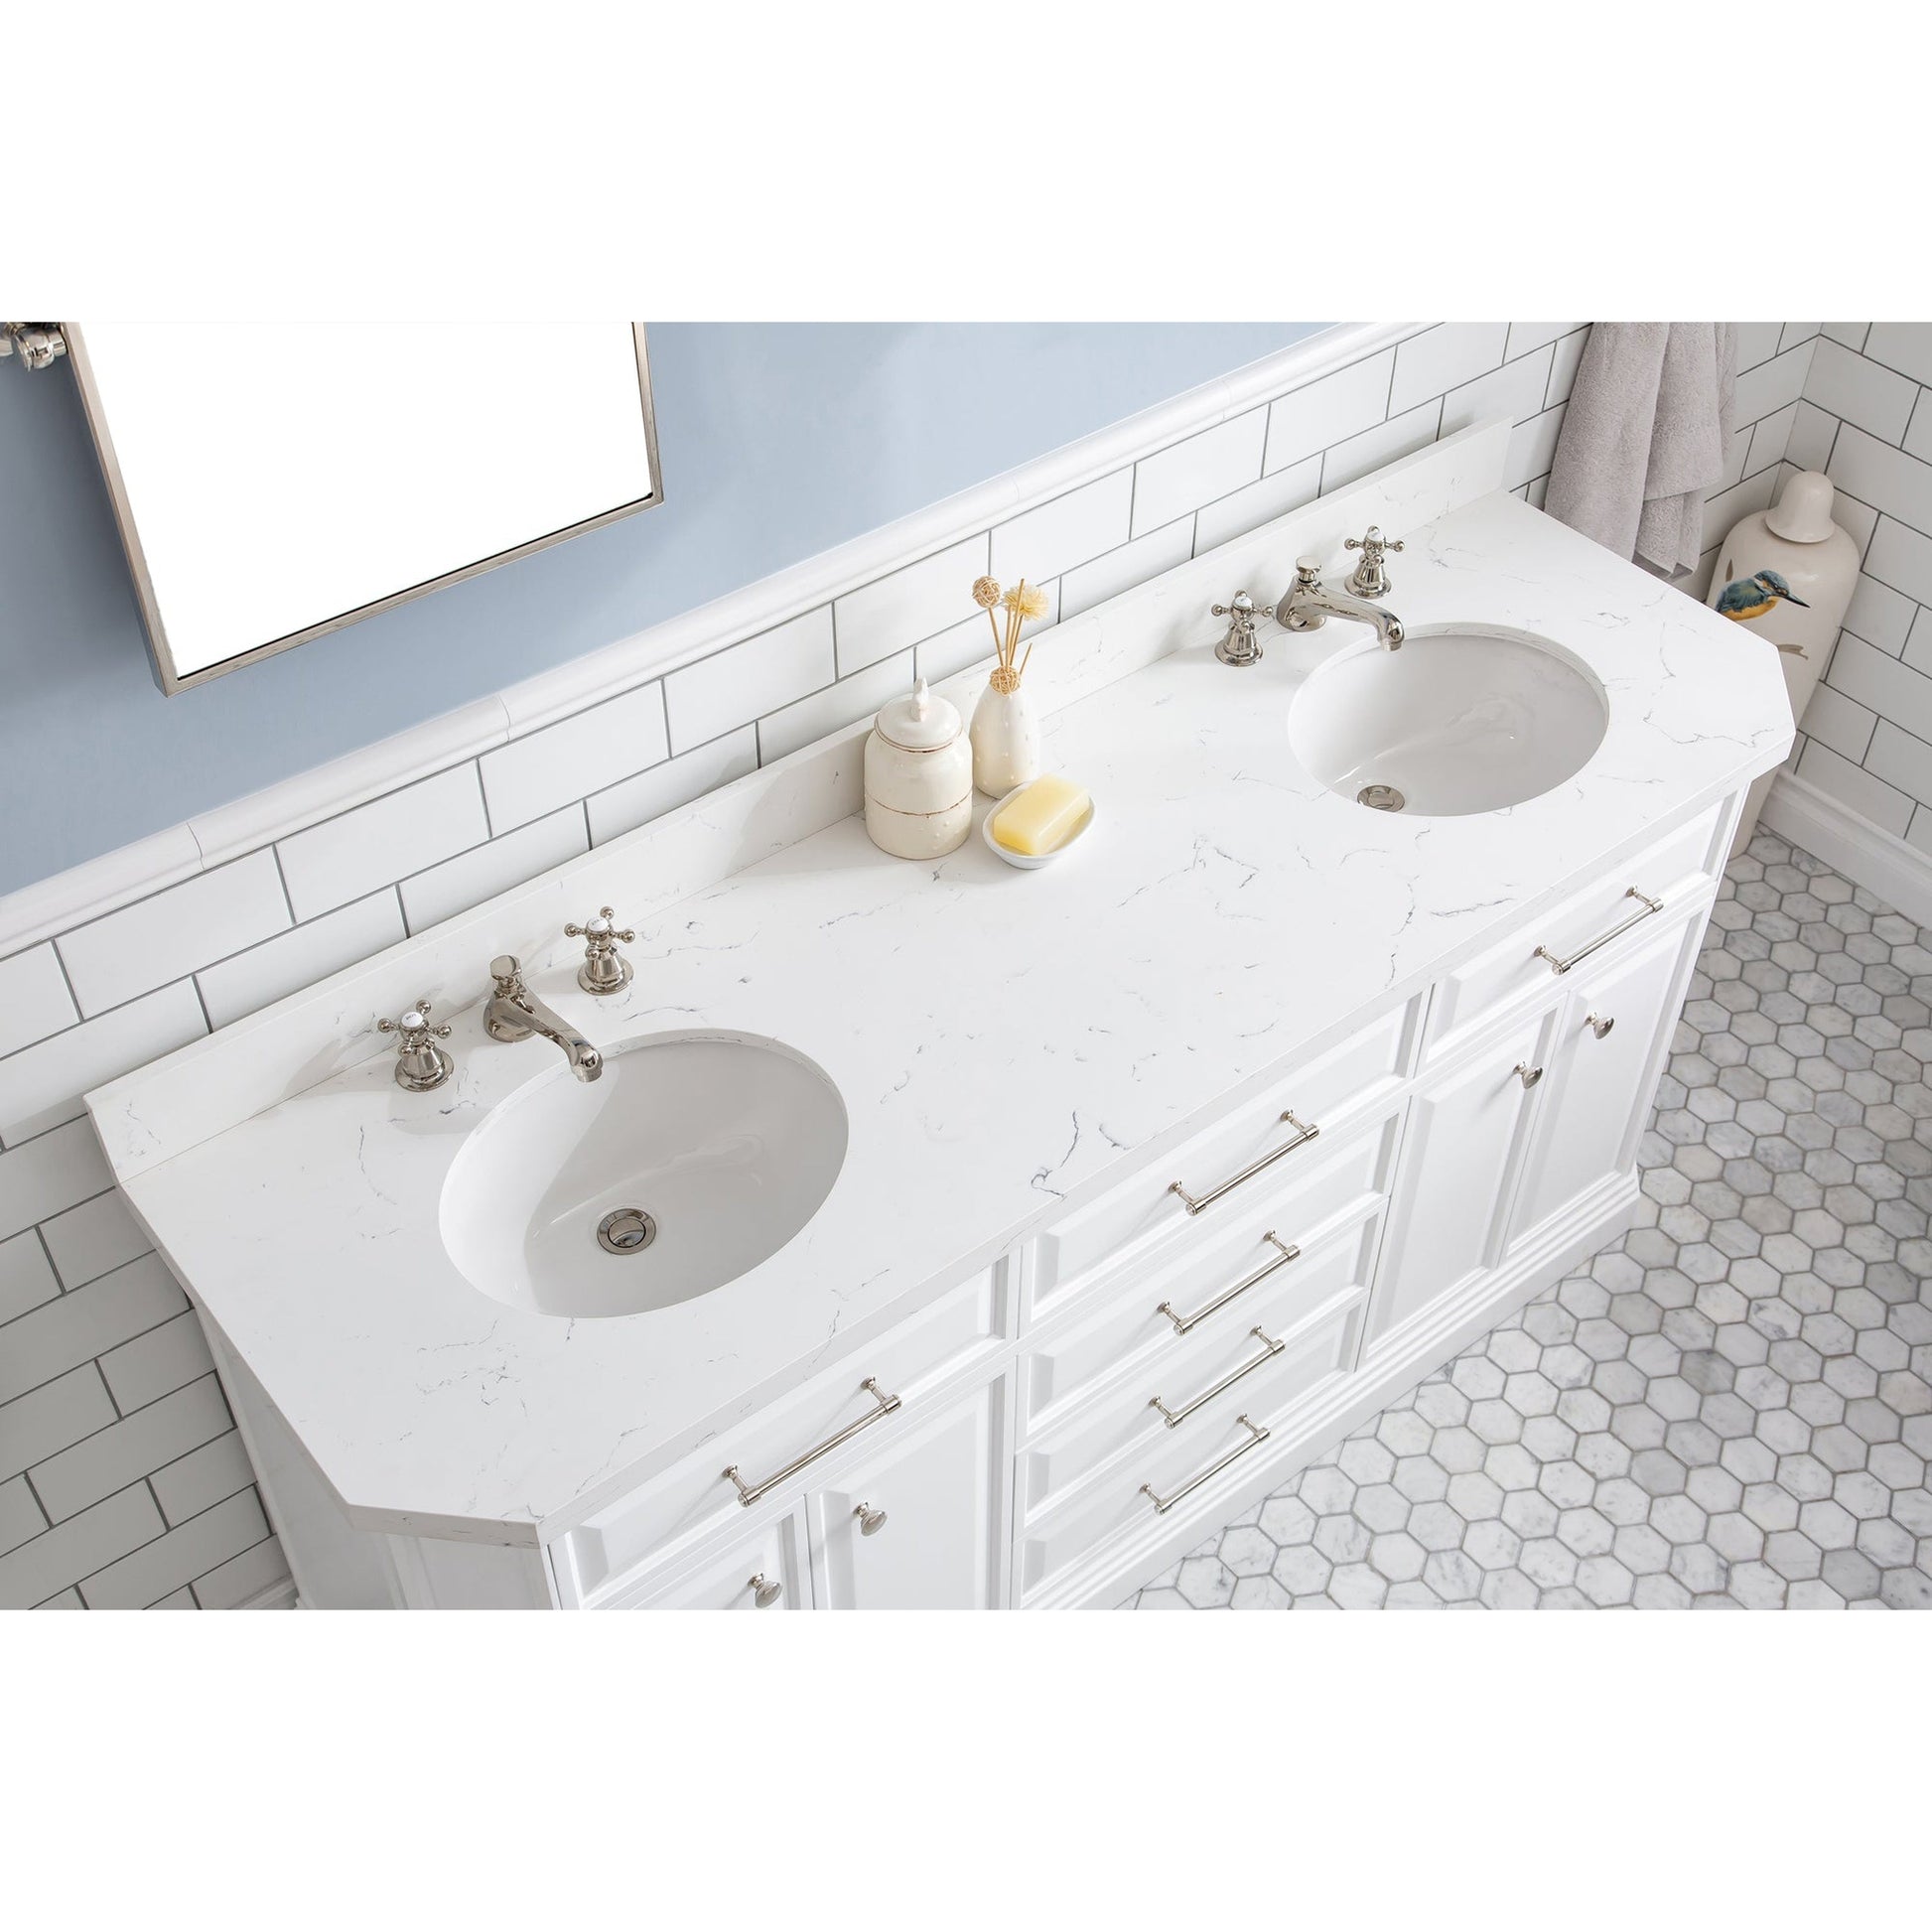 Water Creation Palace 72" Quartz Carrara Pure White Bathroom Vanity Set With Hardware And F2-0009 Faucets, Mirror in Polished Nickel (PVD) Finish